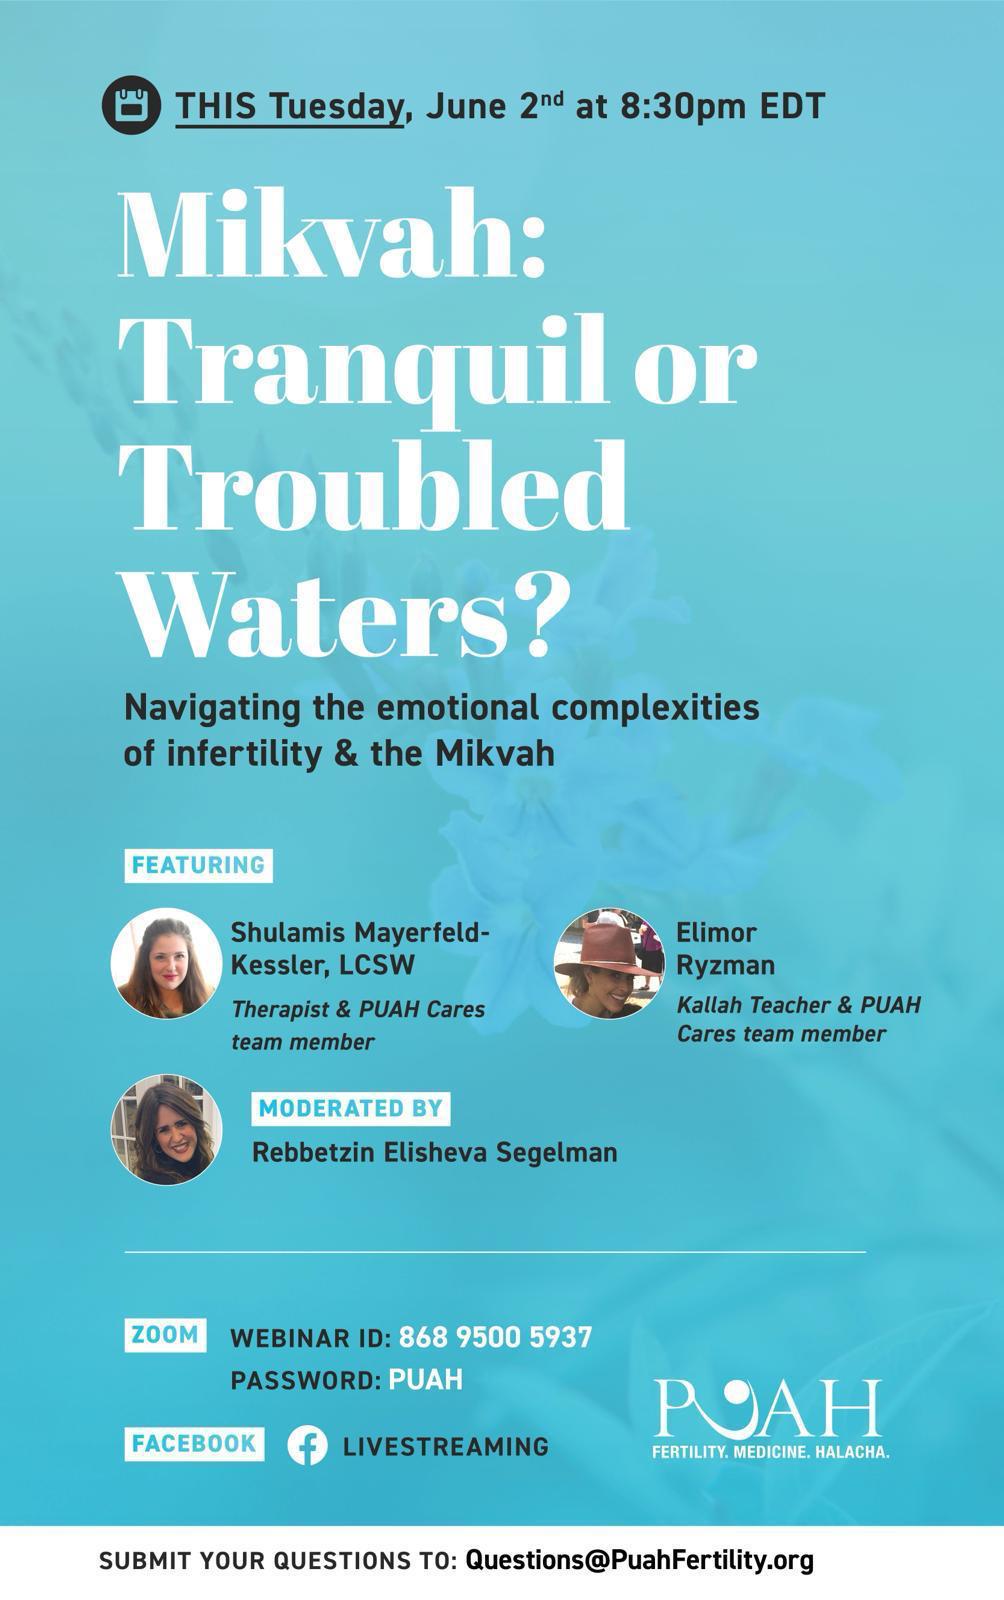 PUAH Webinar - Mikvah: Tranquil or Troubled Waters